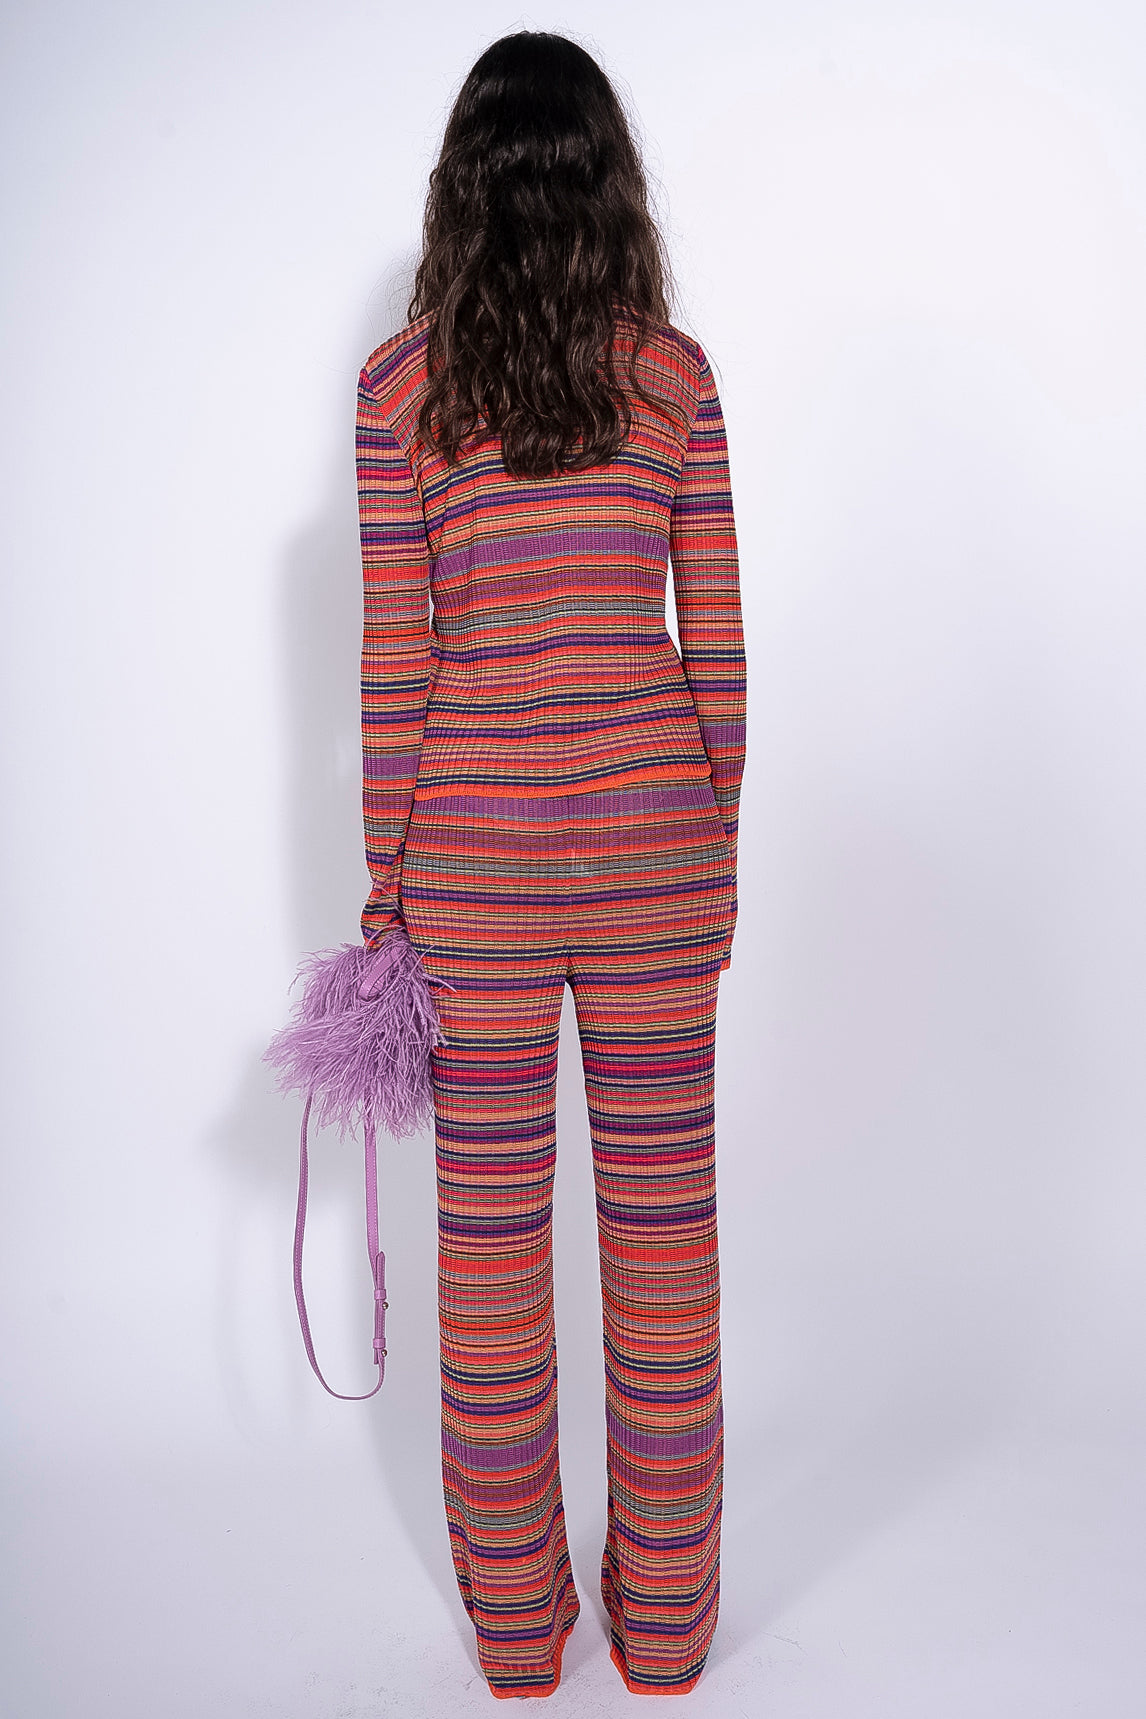 MULTI STRIPE KNITTED TROUSERS marques almeida